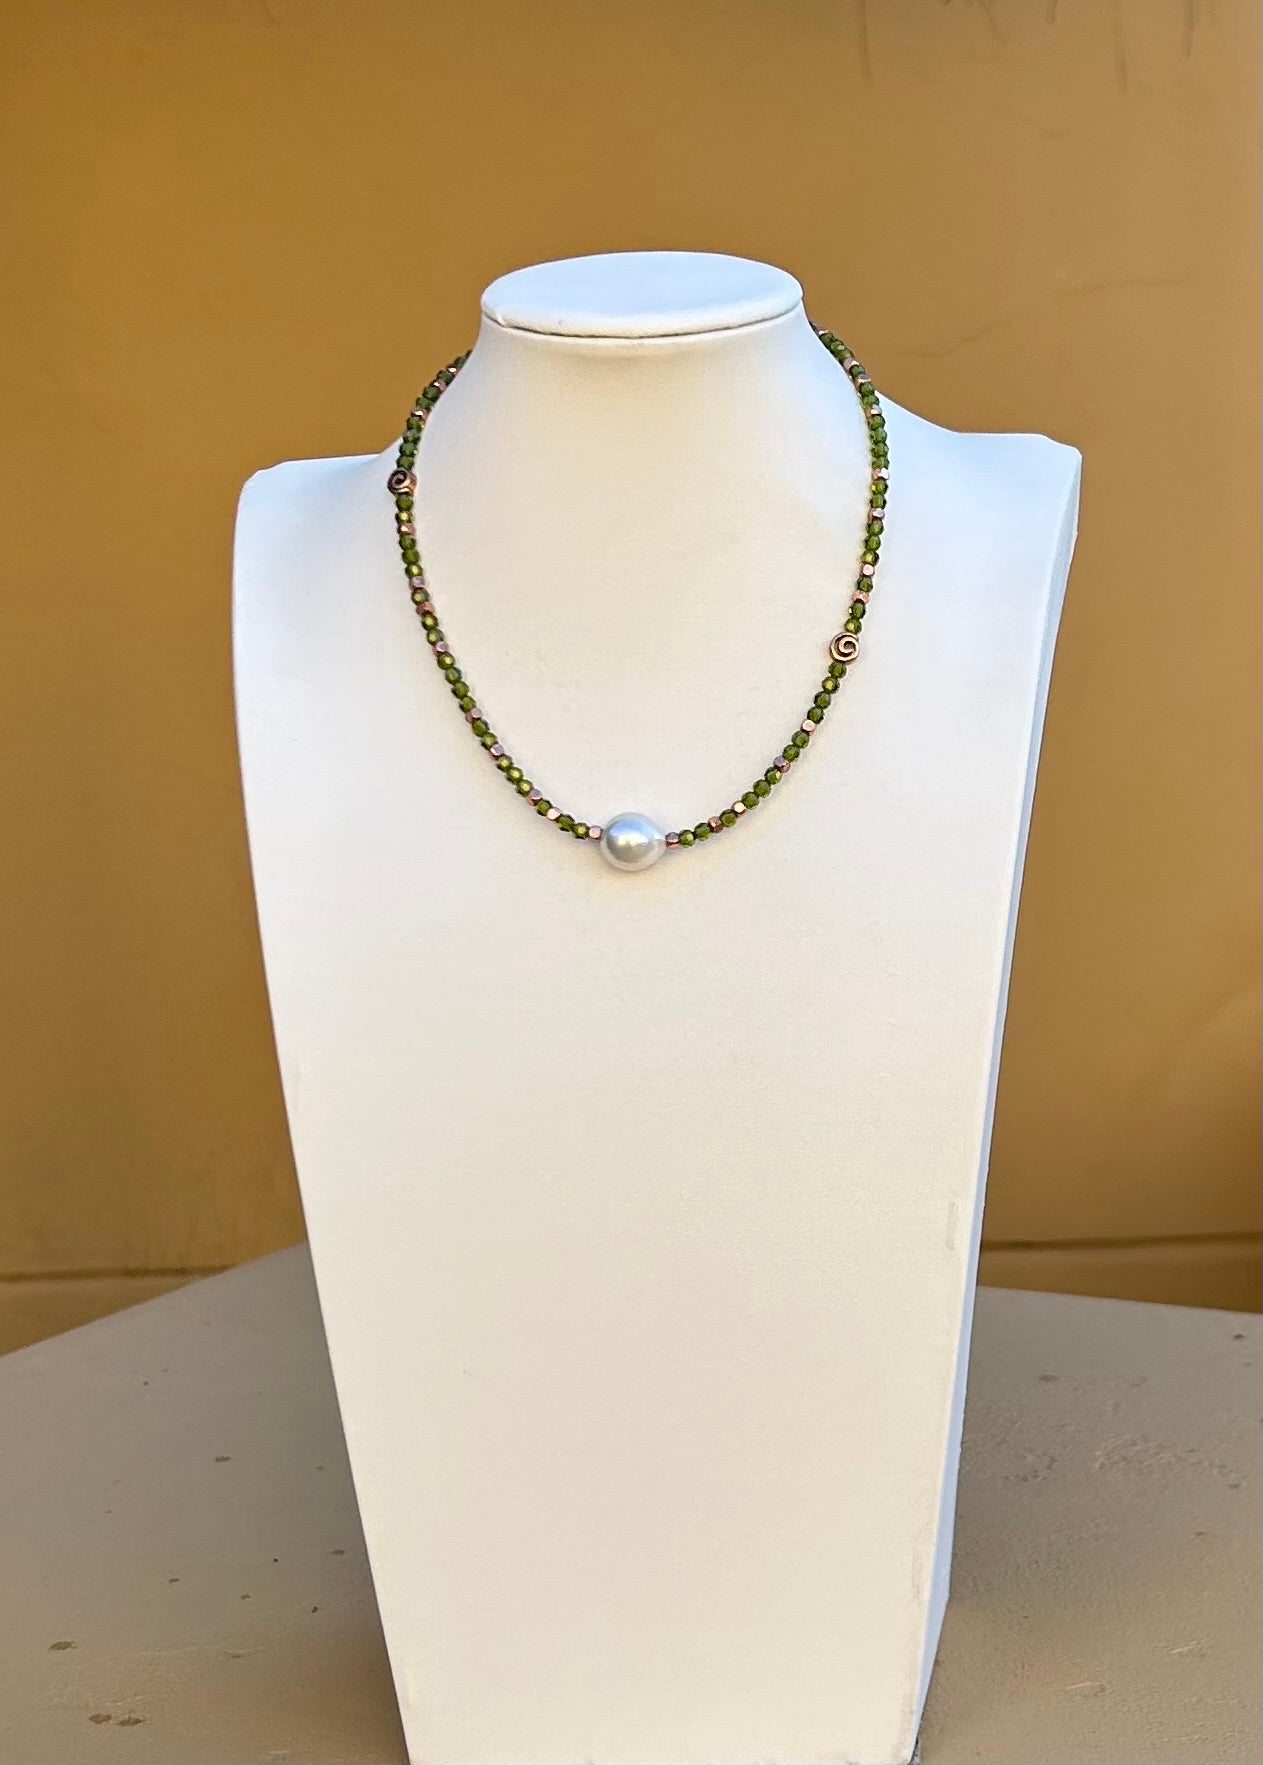 Necklace - Olive green Swarovski crystal necklace with copper